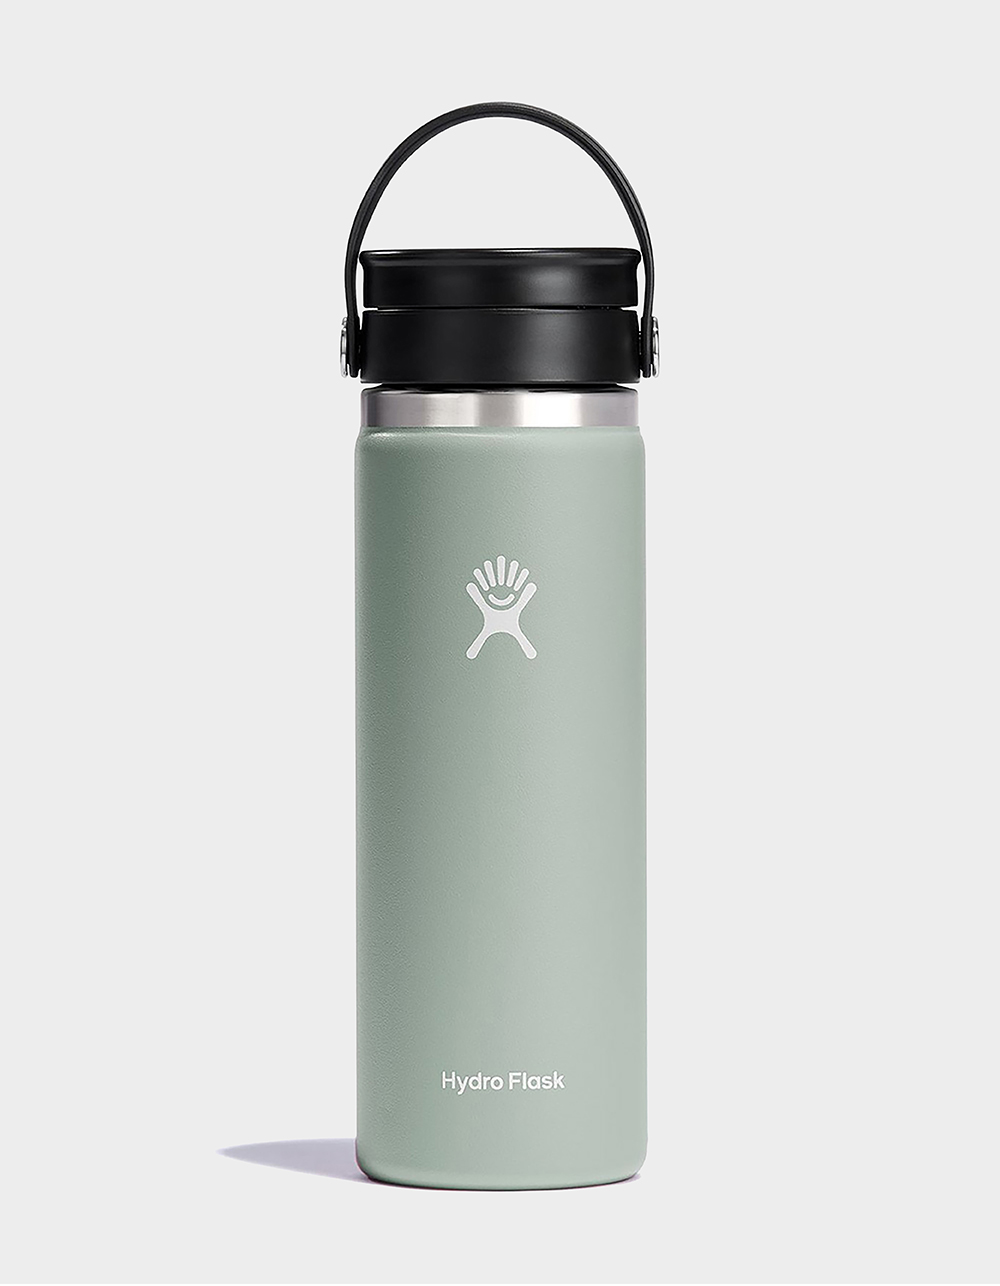 Save up to 50% off Hydro Flask tumblers that keep drinks cold for